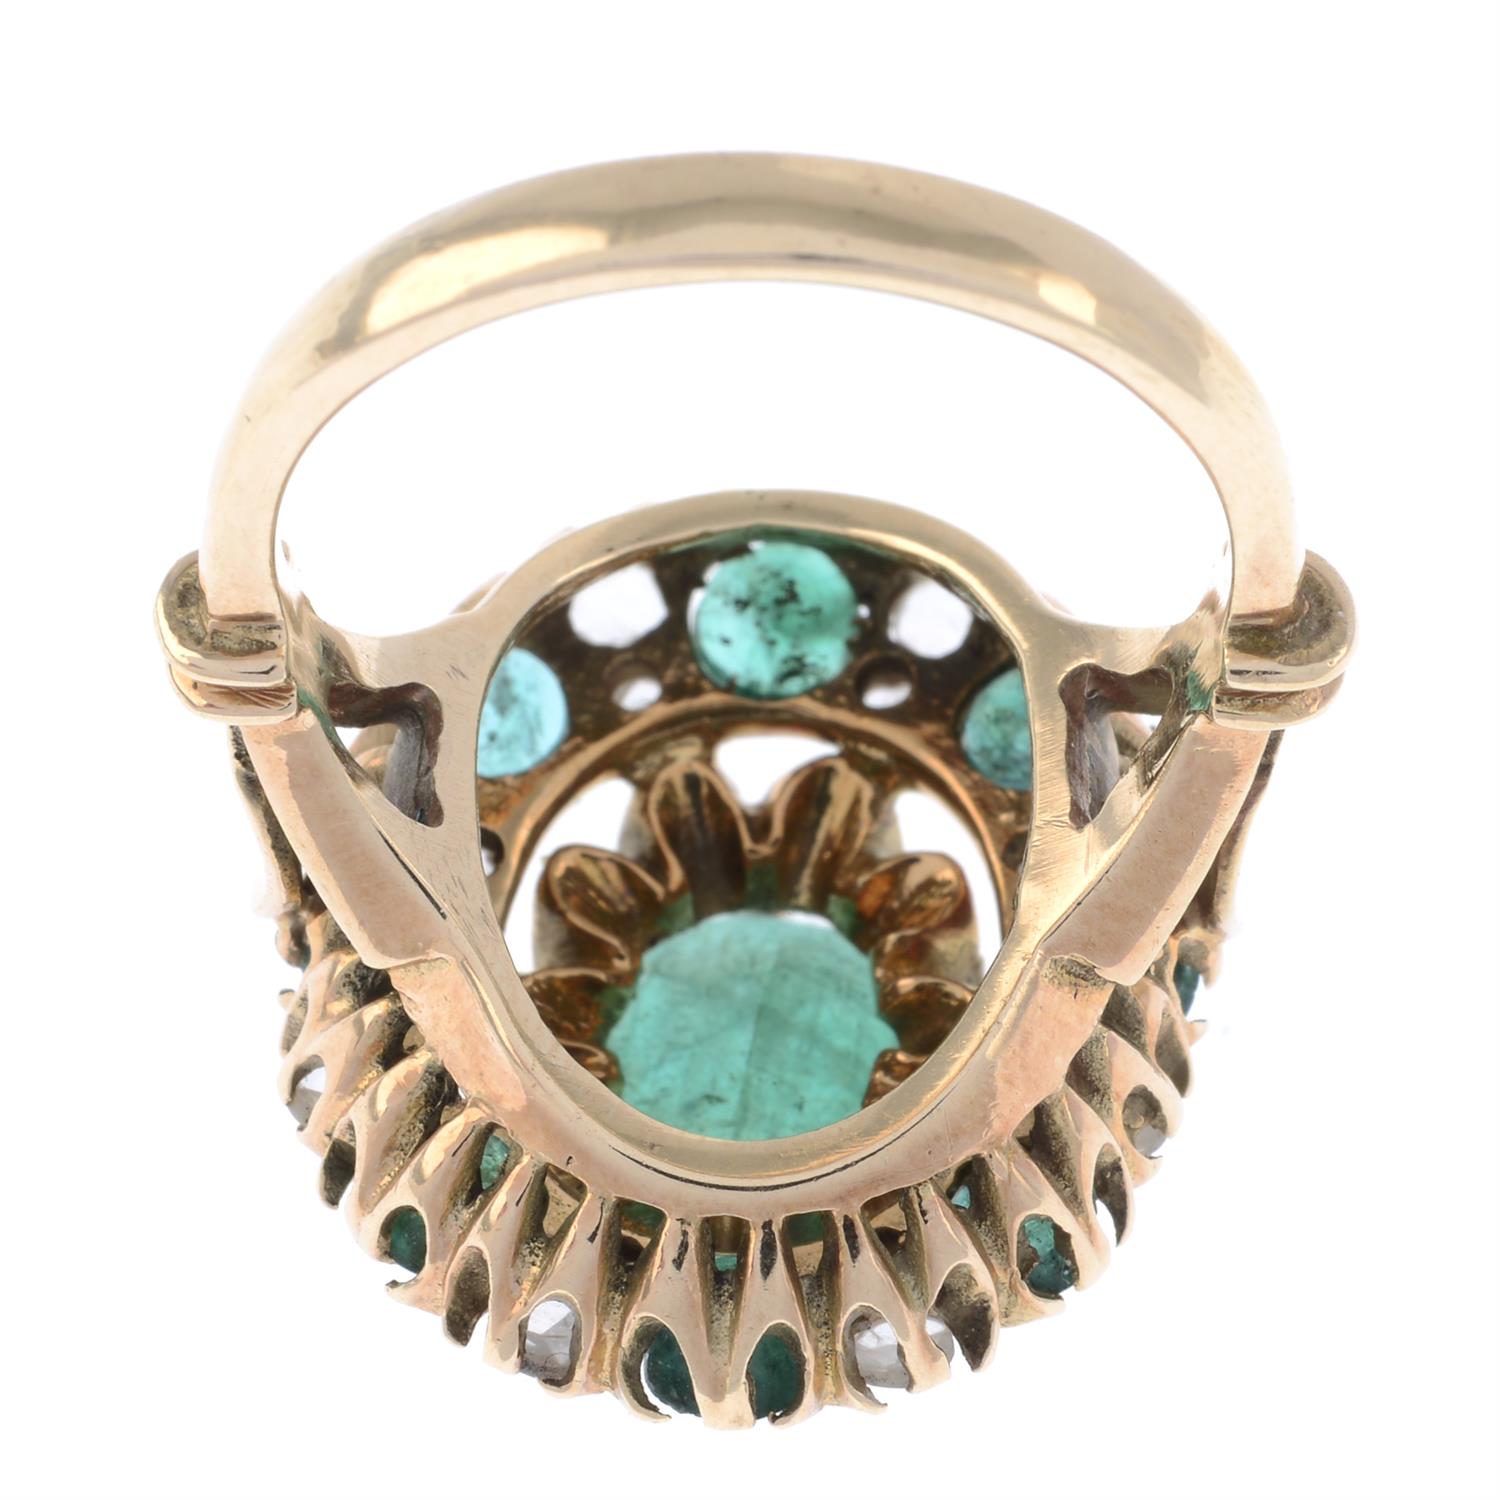 Emerald & diamond cluster ring - Image 2 of 2